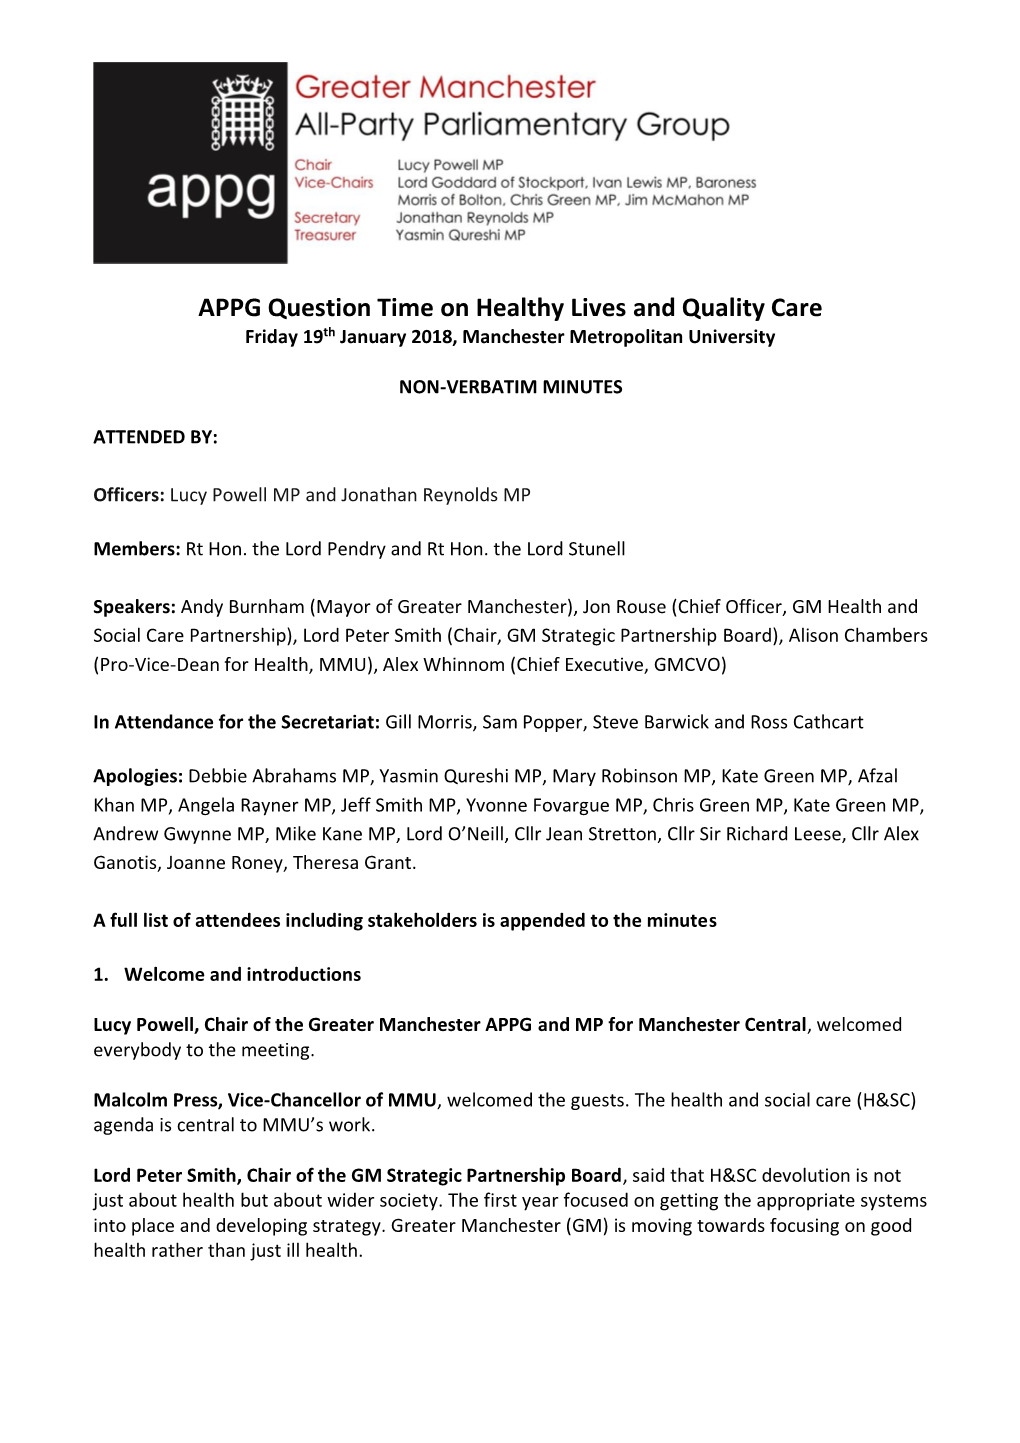 APPG Question Time on Healthy Lives and Quality Care Friday 19Th January 2018, Manchester Metropolitan University